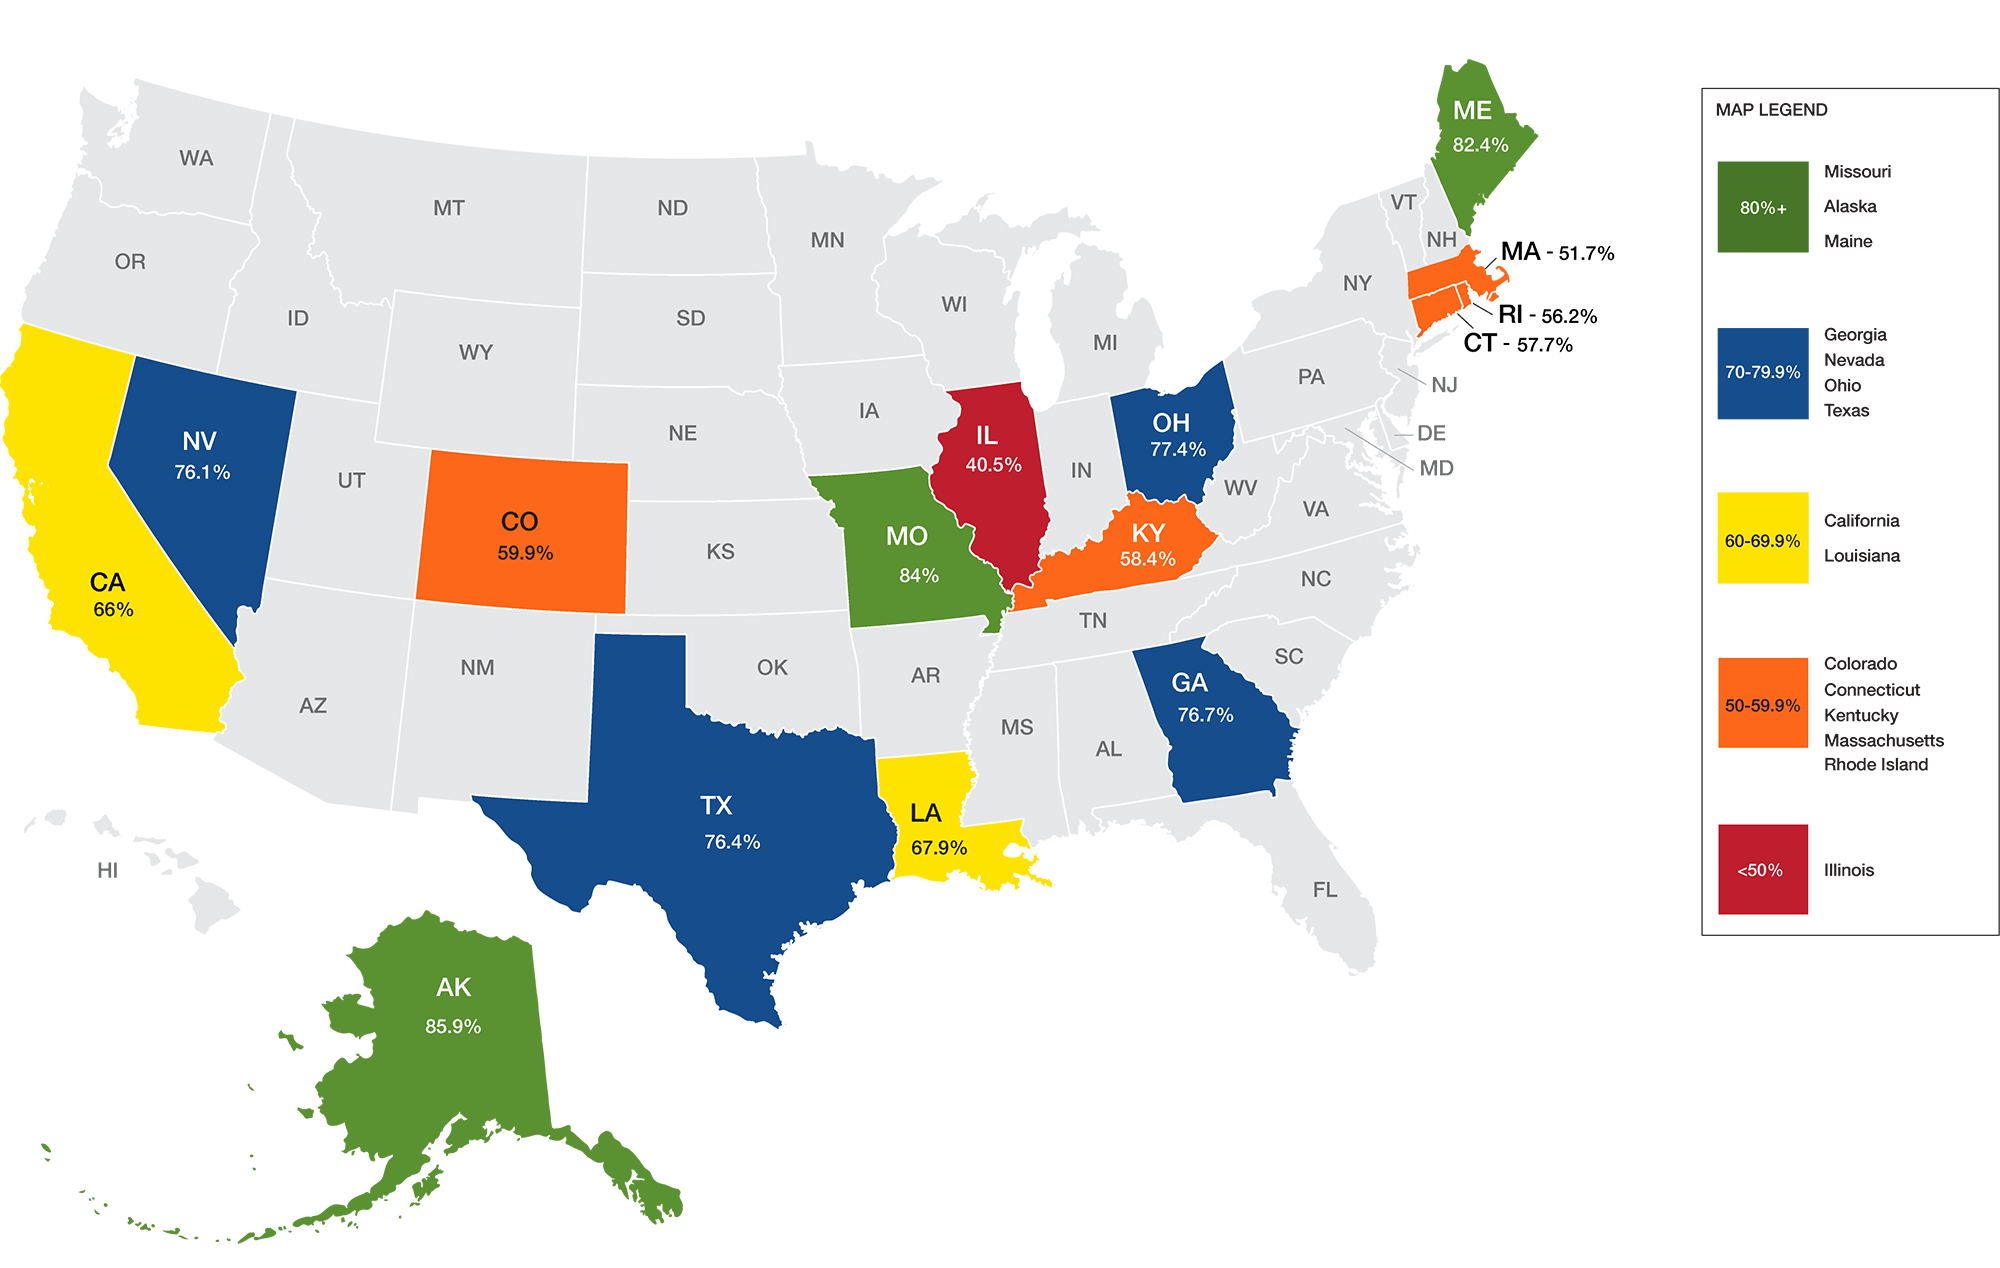 U.S. Map Comparing 15 State Teacher Retirement Systems that do not contribute to Social Security.